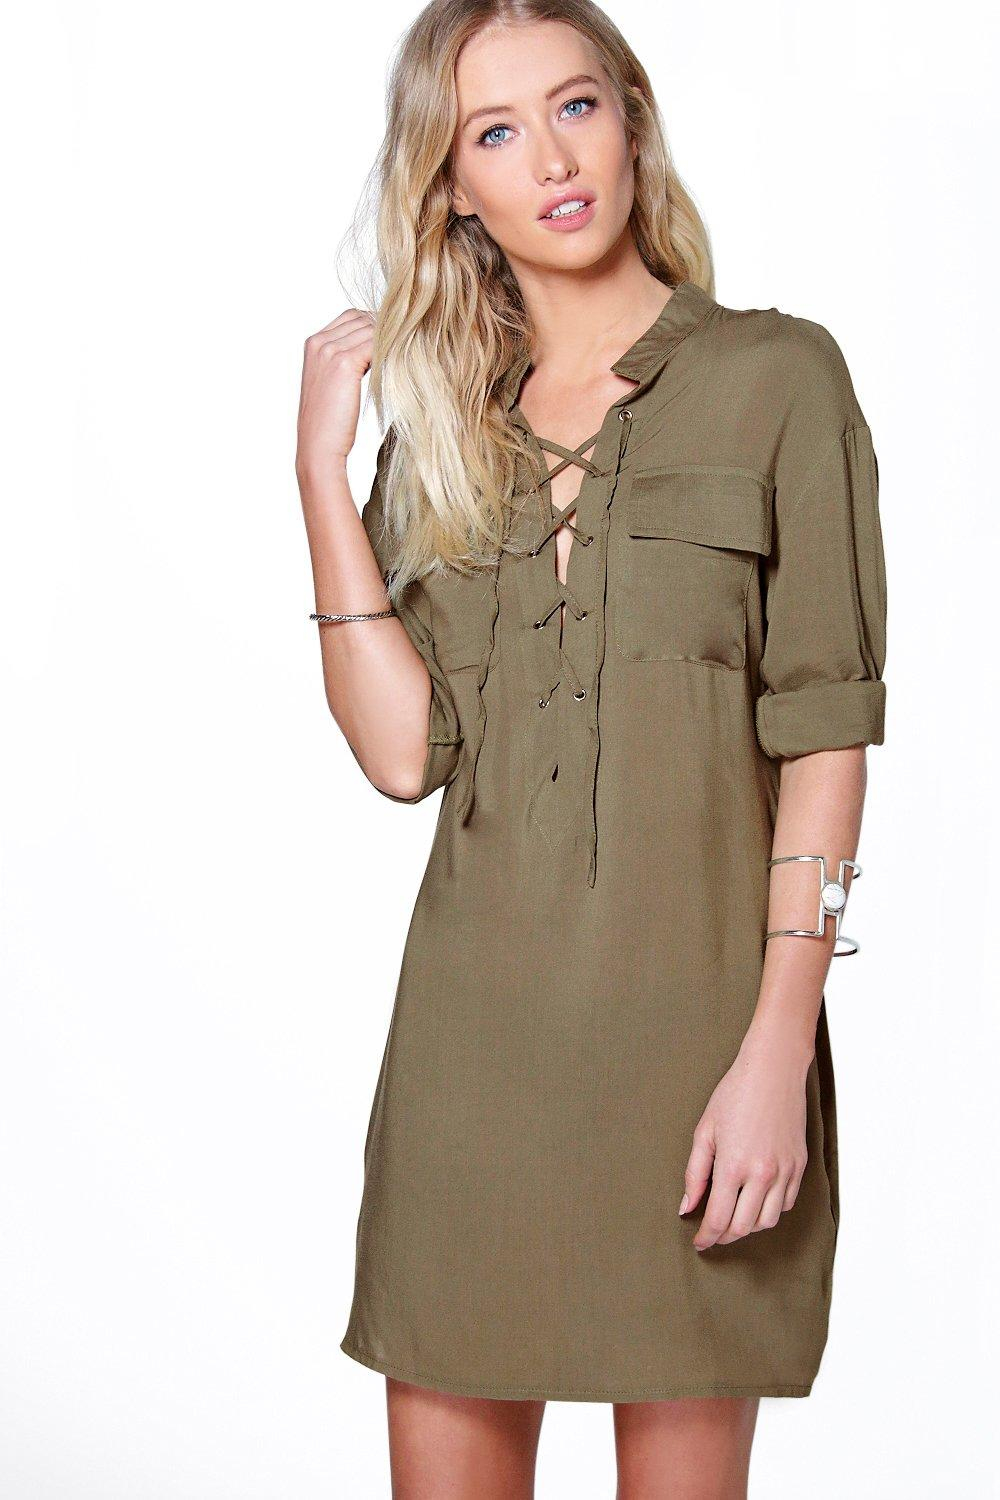 Womens dress how to see shirt